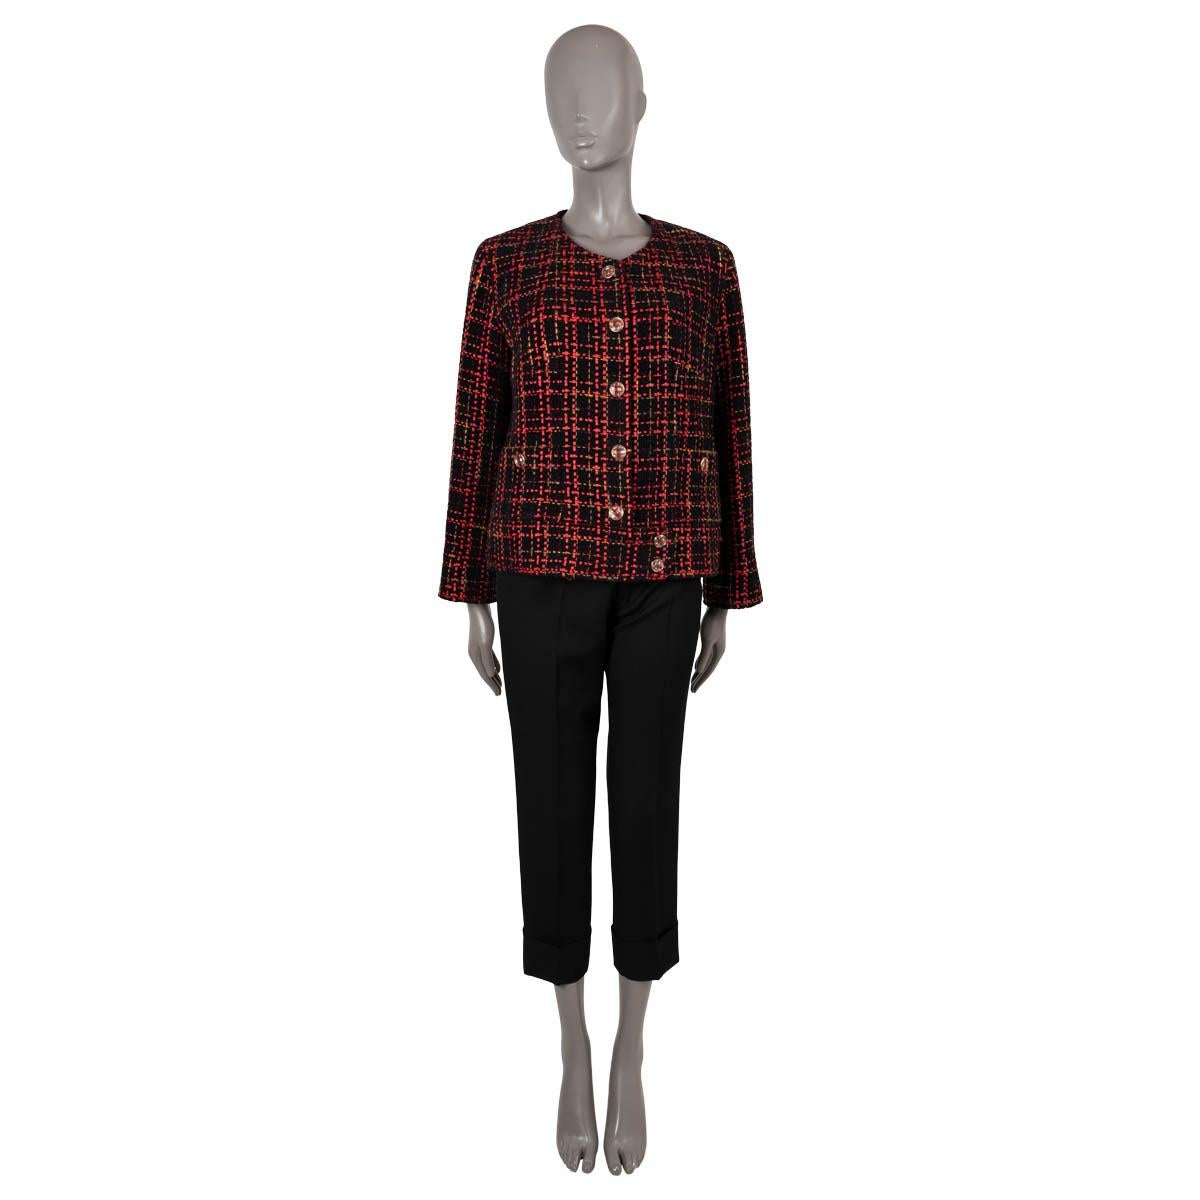 100% authentic Chanel collarless tweed jacket in black, red and dark yellow cotton (43%), wool (22%), cashmere (13%), polyester (11%) and silk (11%). Features two buttoned patch pockets at the waist. Closes with rainbow rhinestone buttons and is